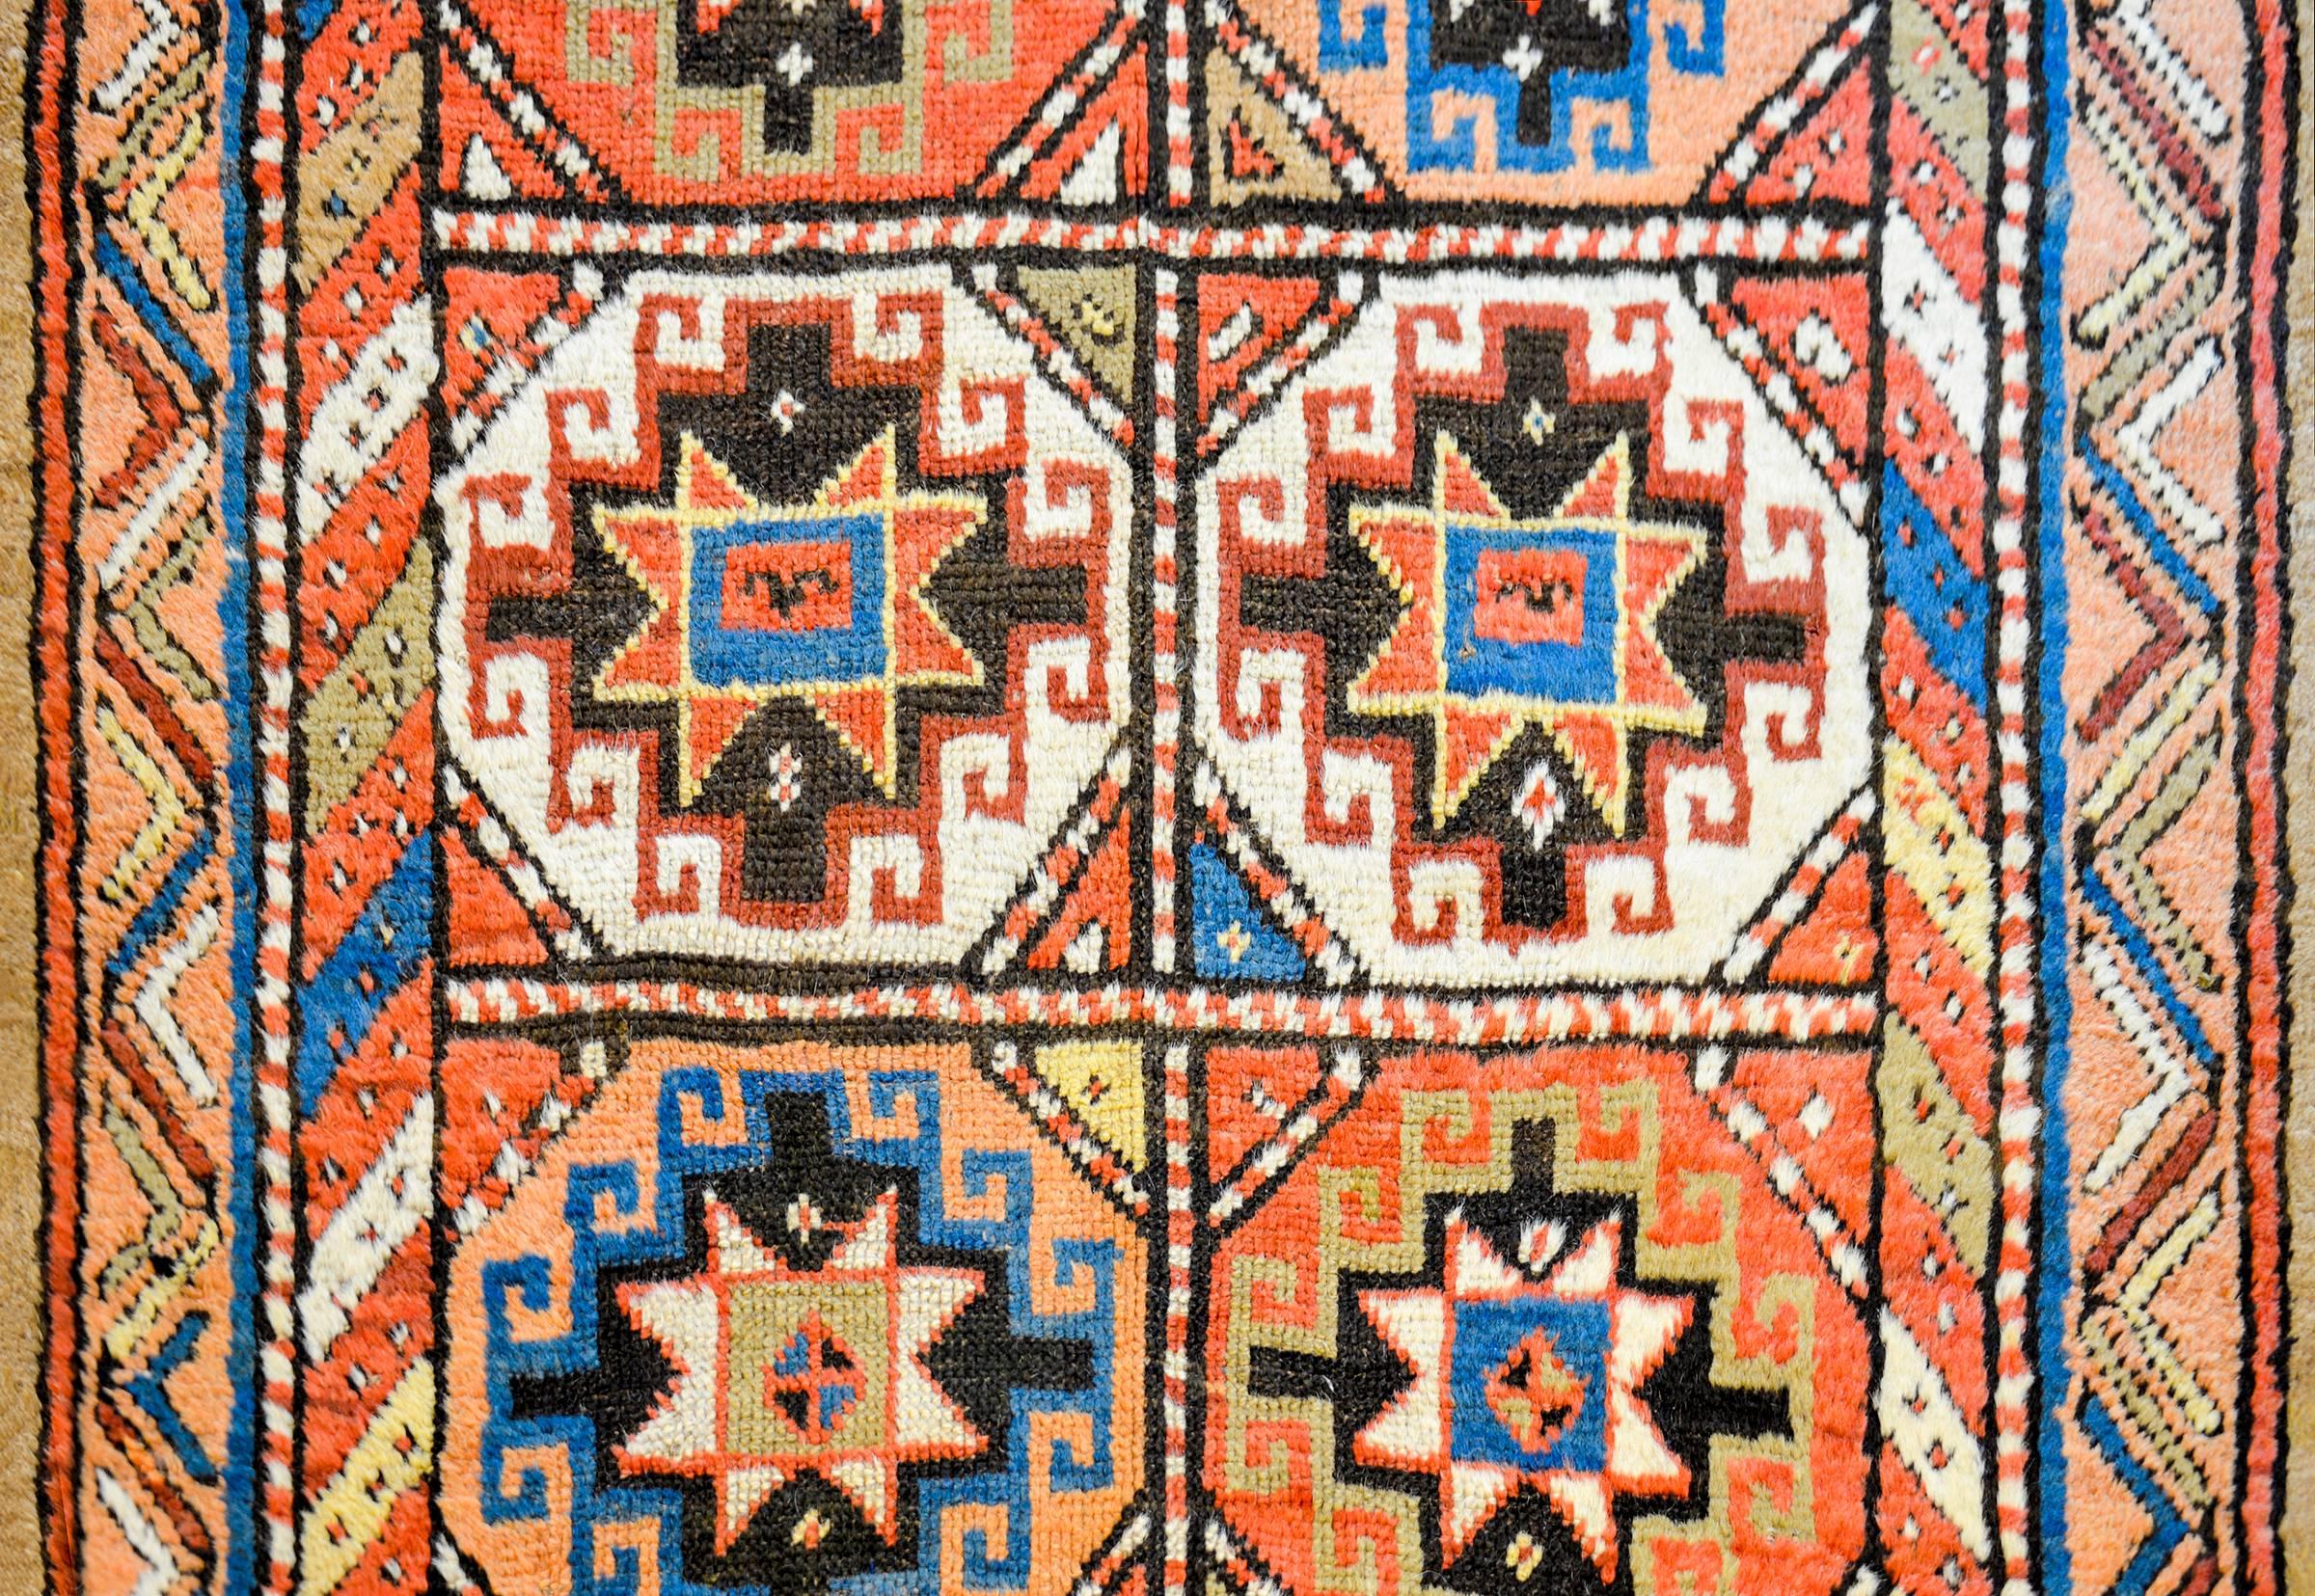 A wonderful early 20th century Persian Moghan runner with multiple multicolored diamond medallions on a camel hair background. The border is simple, with a diagonal stripe pattern woven in multicolored wool, with a wide camel hair outer-stripe.